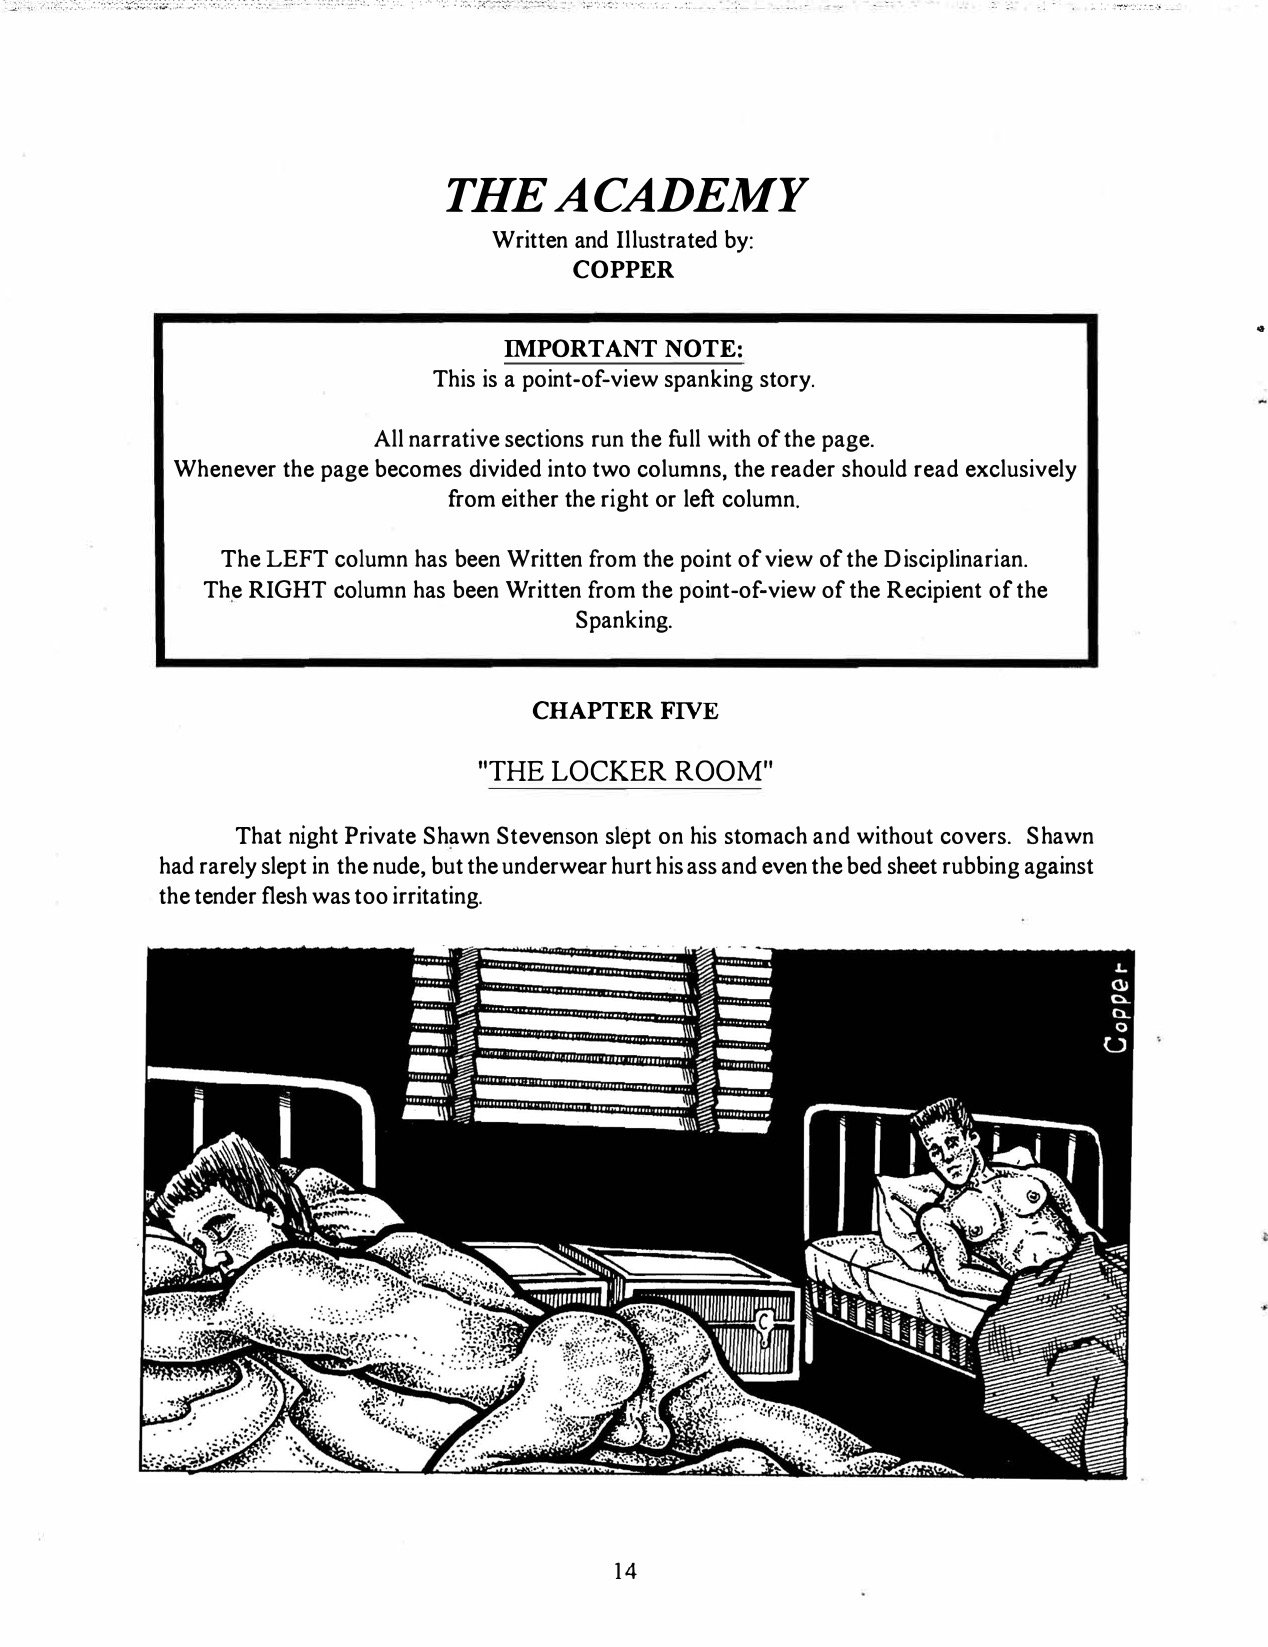 The Academy, Chapter Five “The Locker Room”_1.jpg